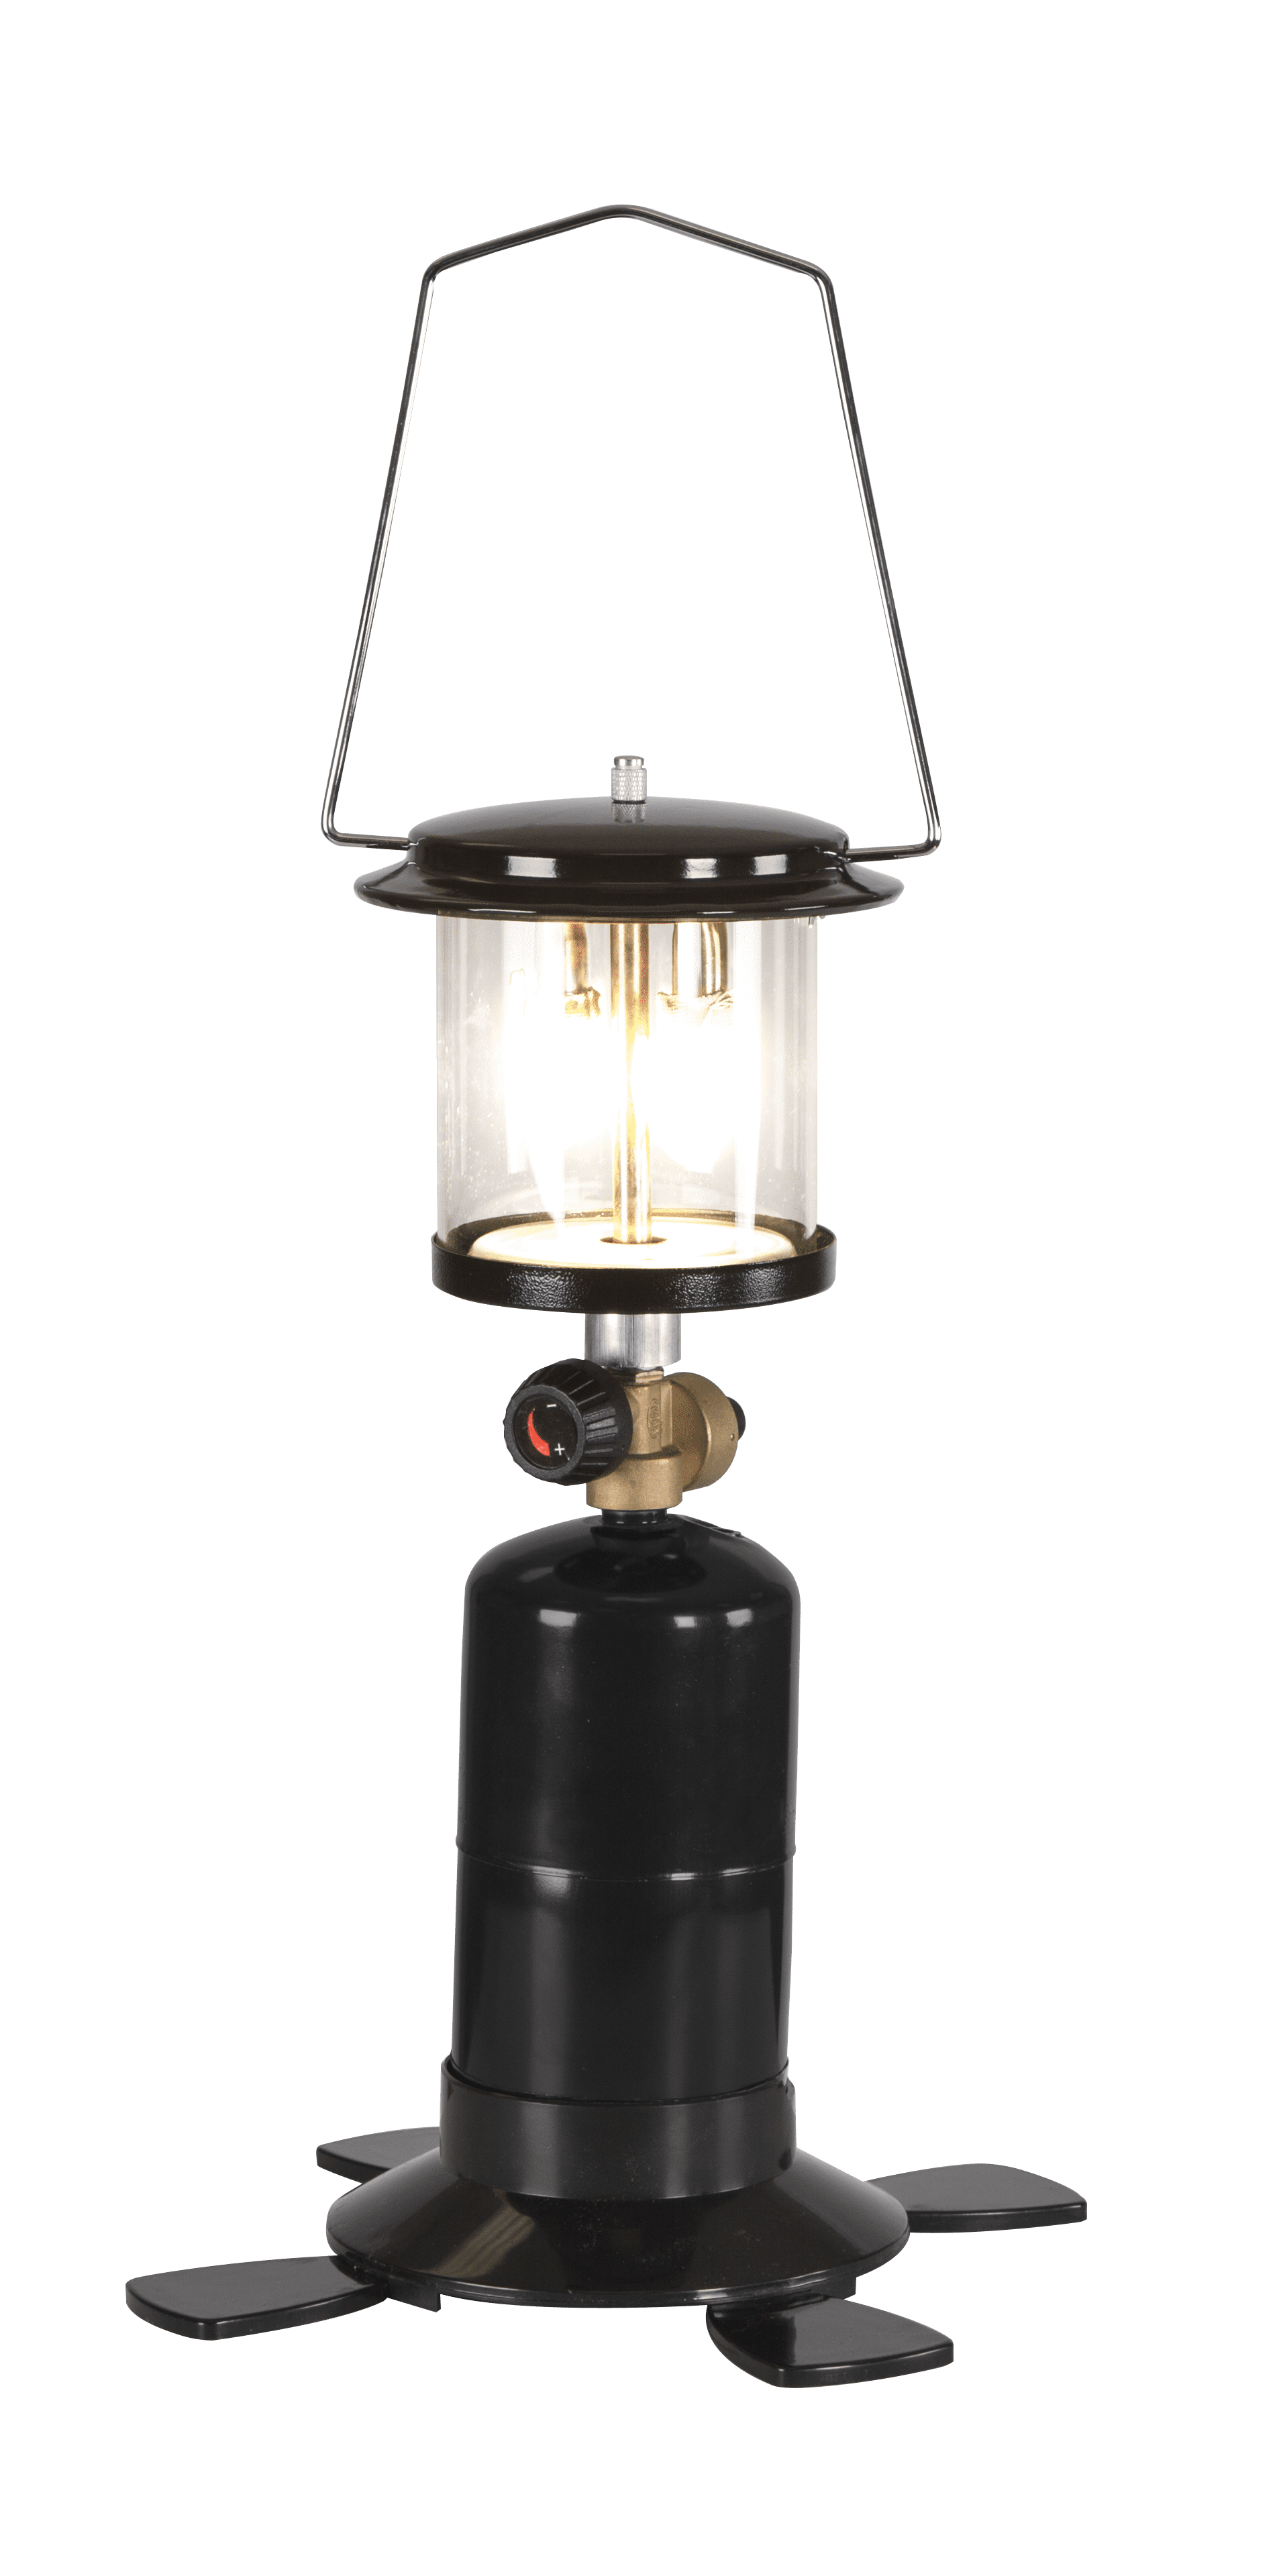 Coleman 1000 Lumens Gas Propane Camping, Coleman Table Lamp Value